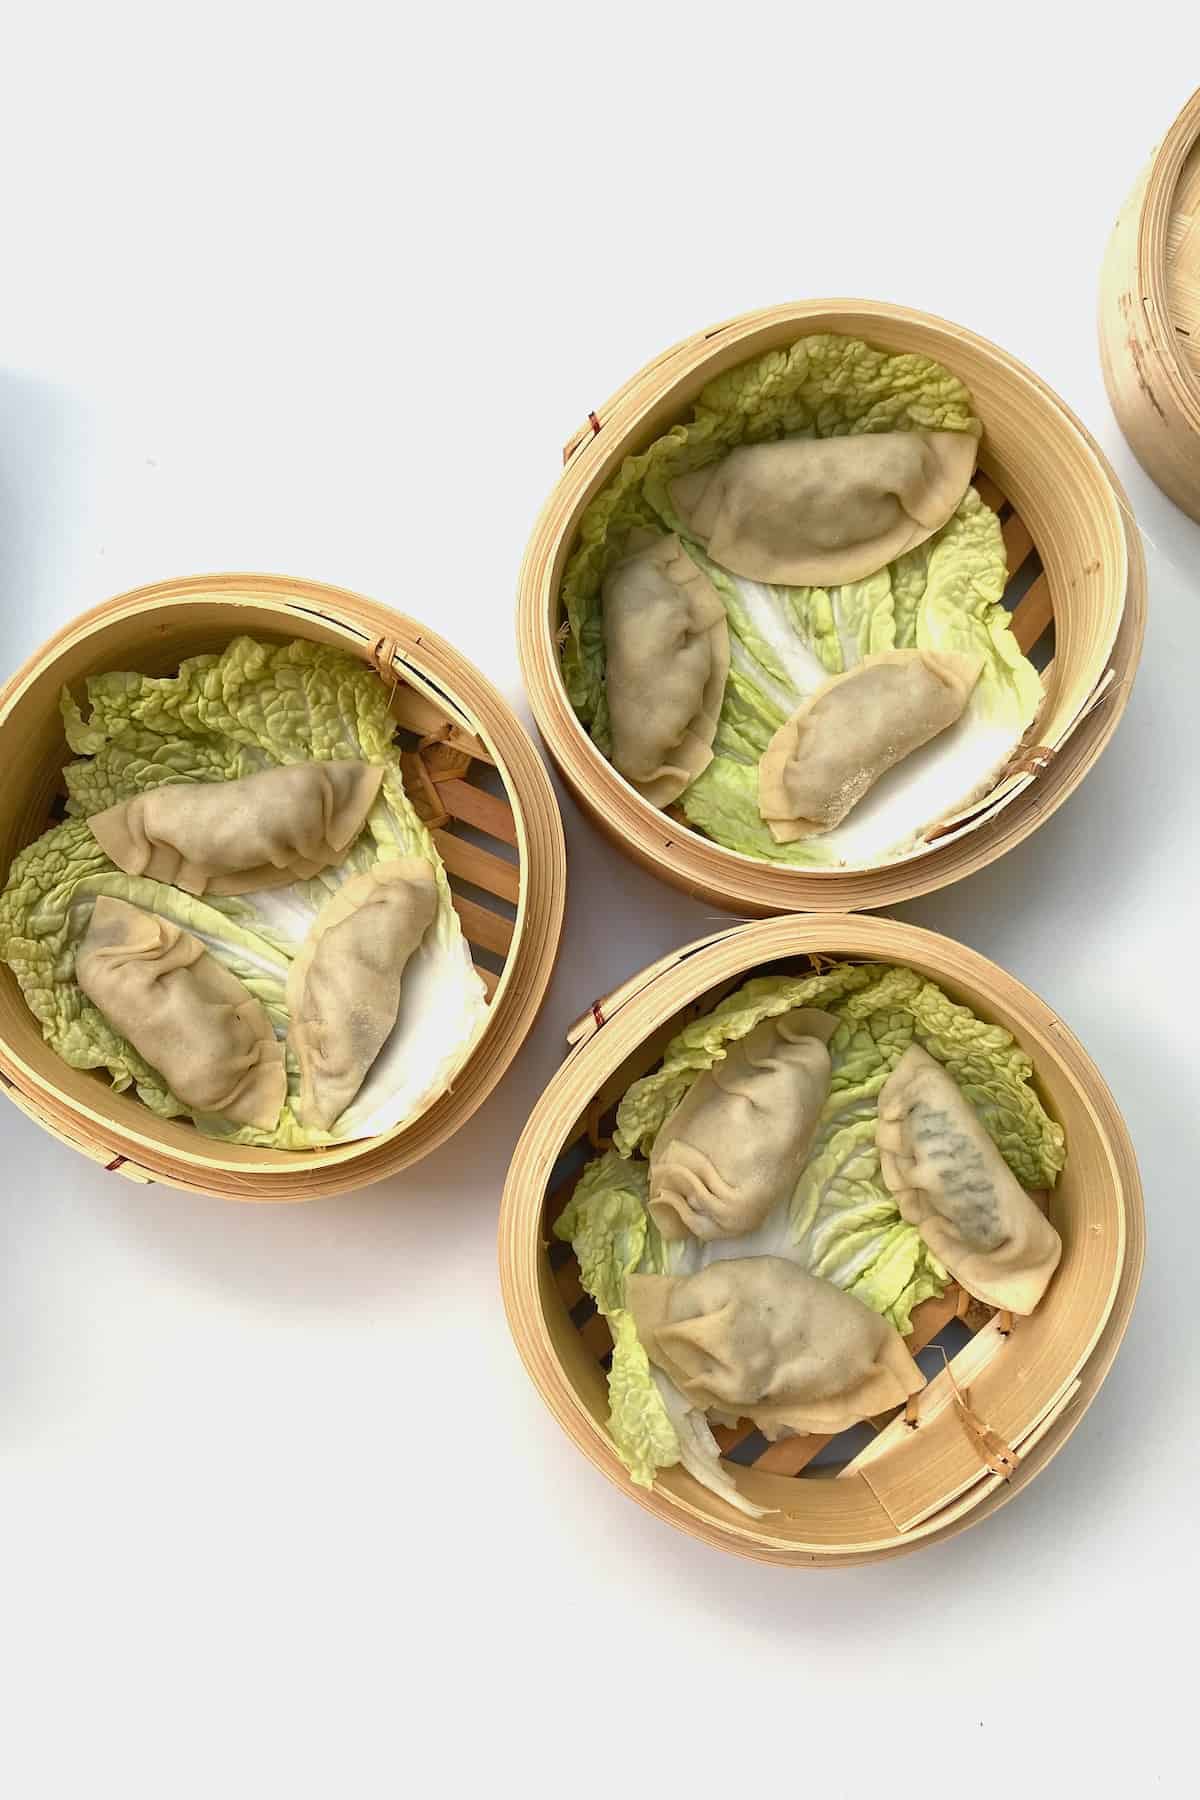 Dumplings ready to be steamed in a bamboo basket